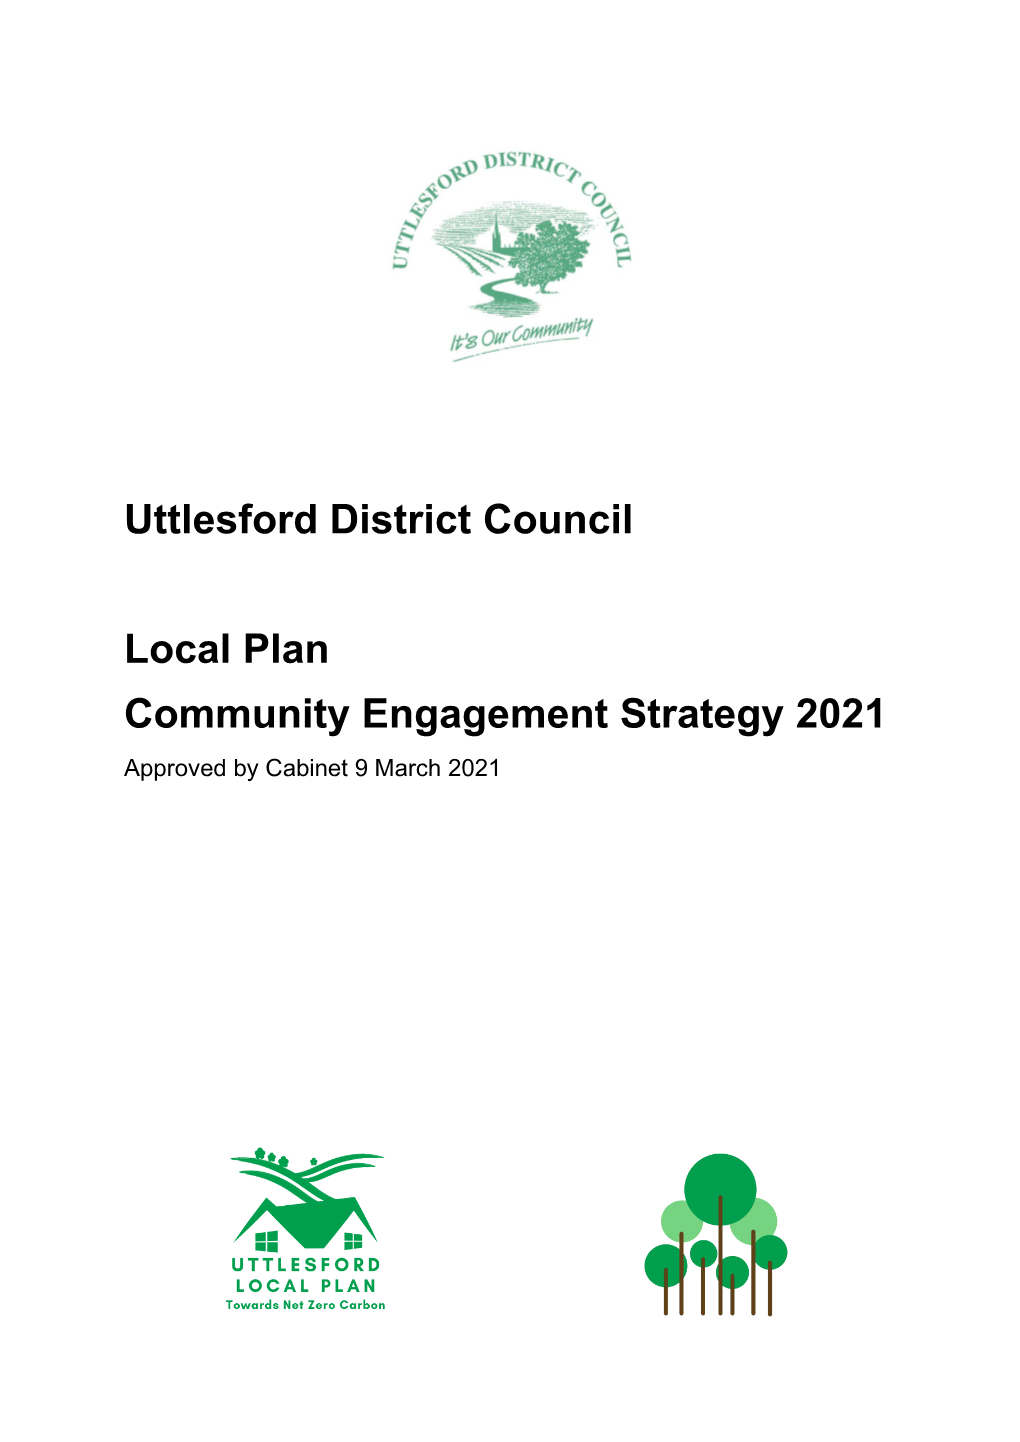 Uttlesford District Council Local Plan Community Engagement Strategy